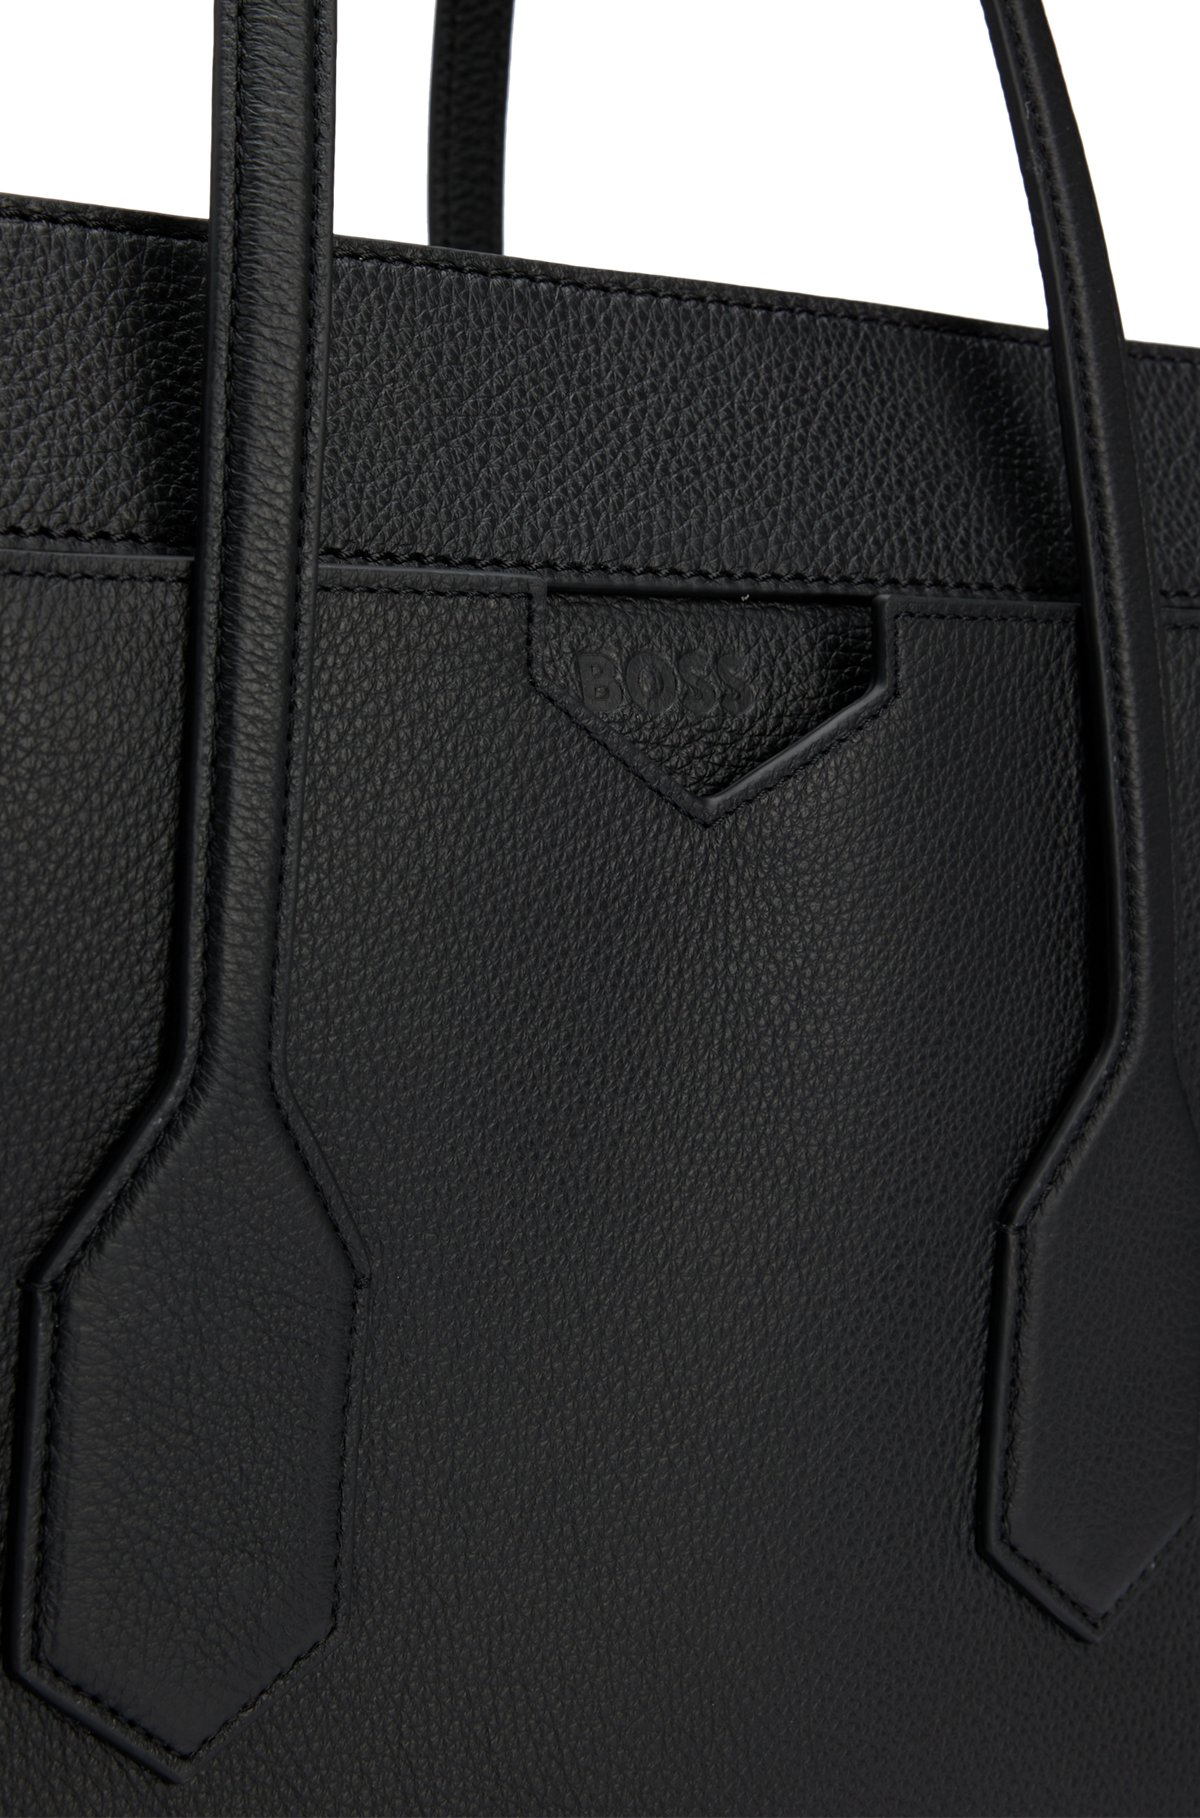 BOSS - Tote bag in grained leather with embossed logo